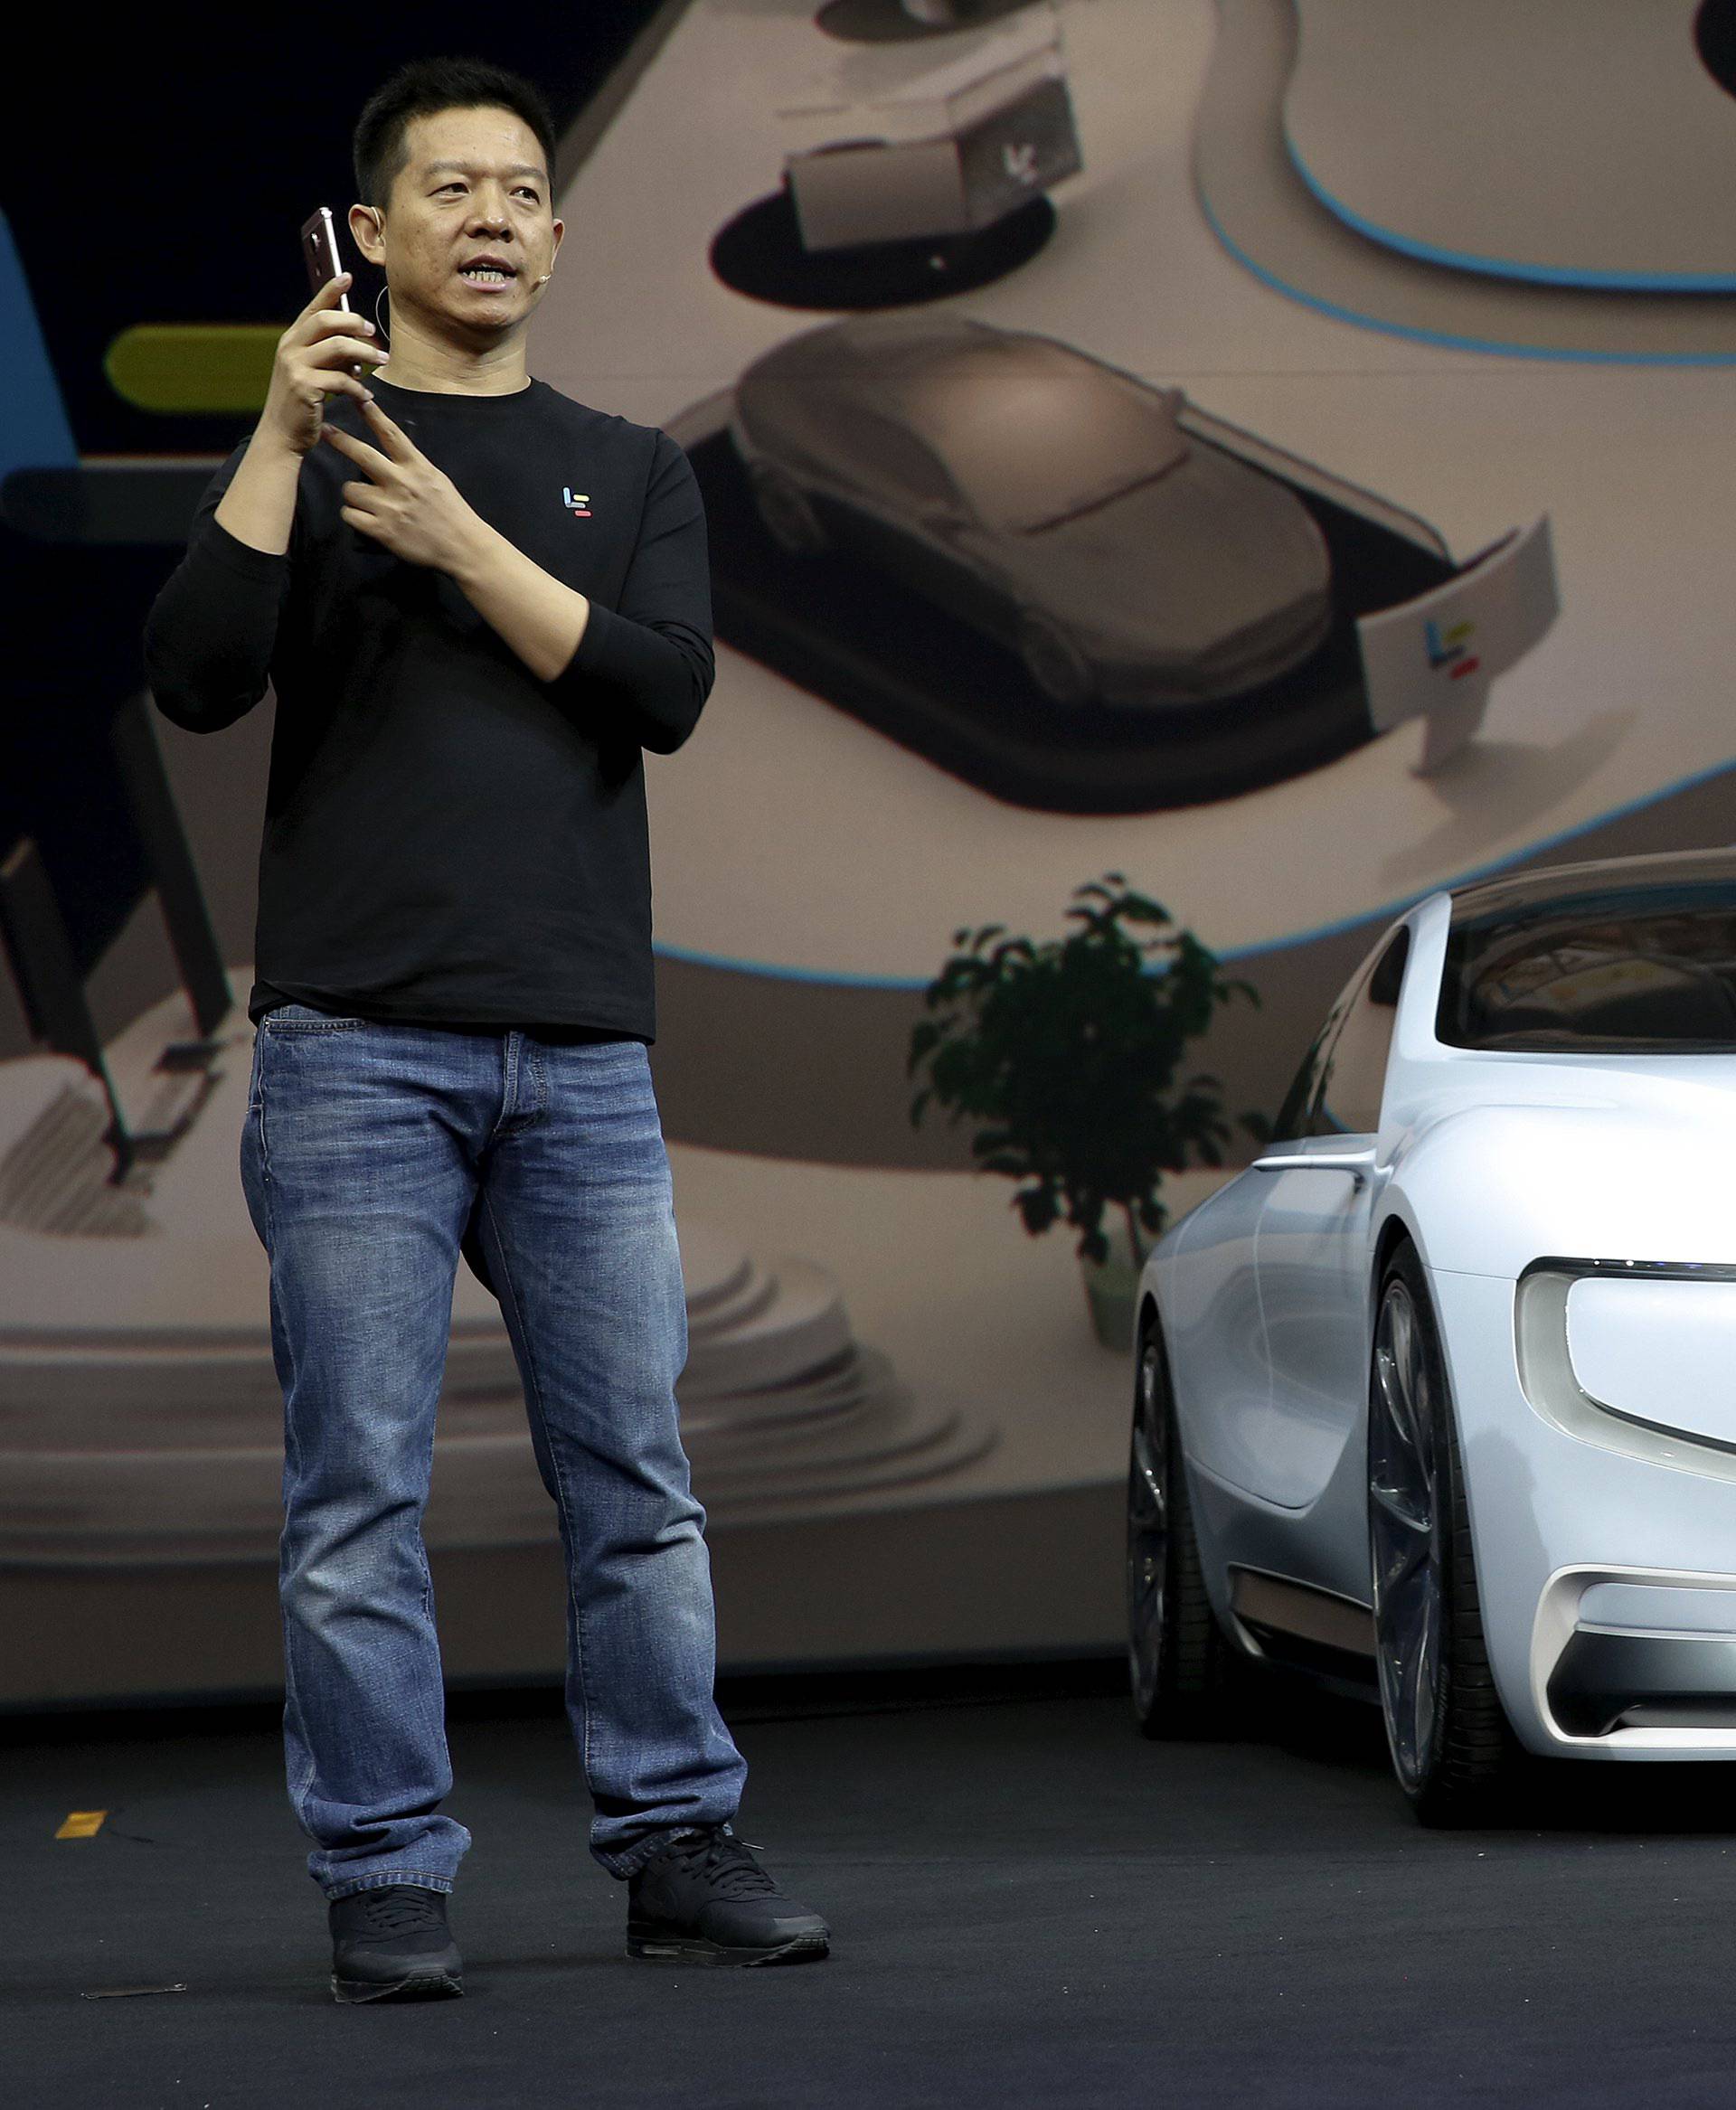 Jia, co-founder and head of Le Holdings Co Ltd, also known as LeEco and formerly as LeTV, gestures as he unveils an all-electric battery "concept" car called LeSEE during a ceremony in Beijingx